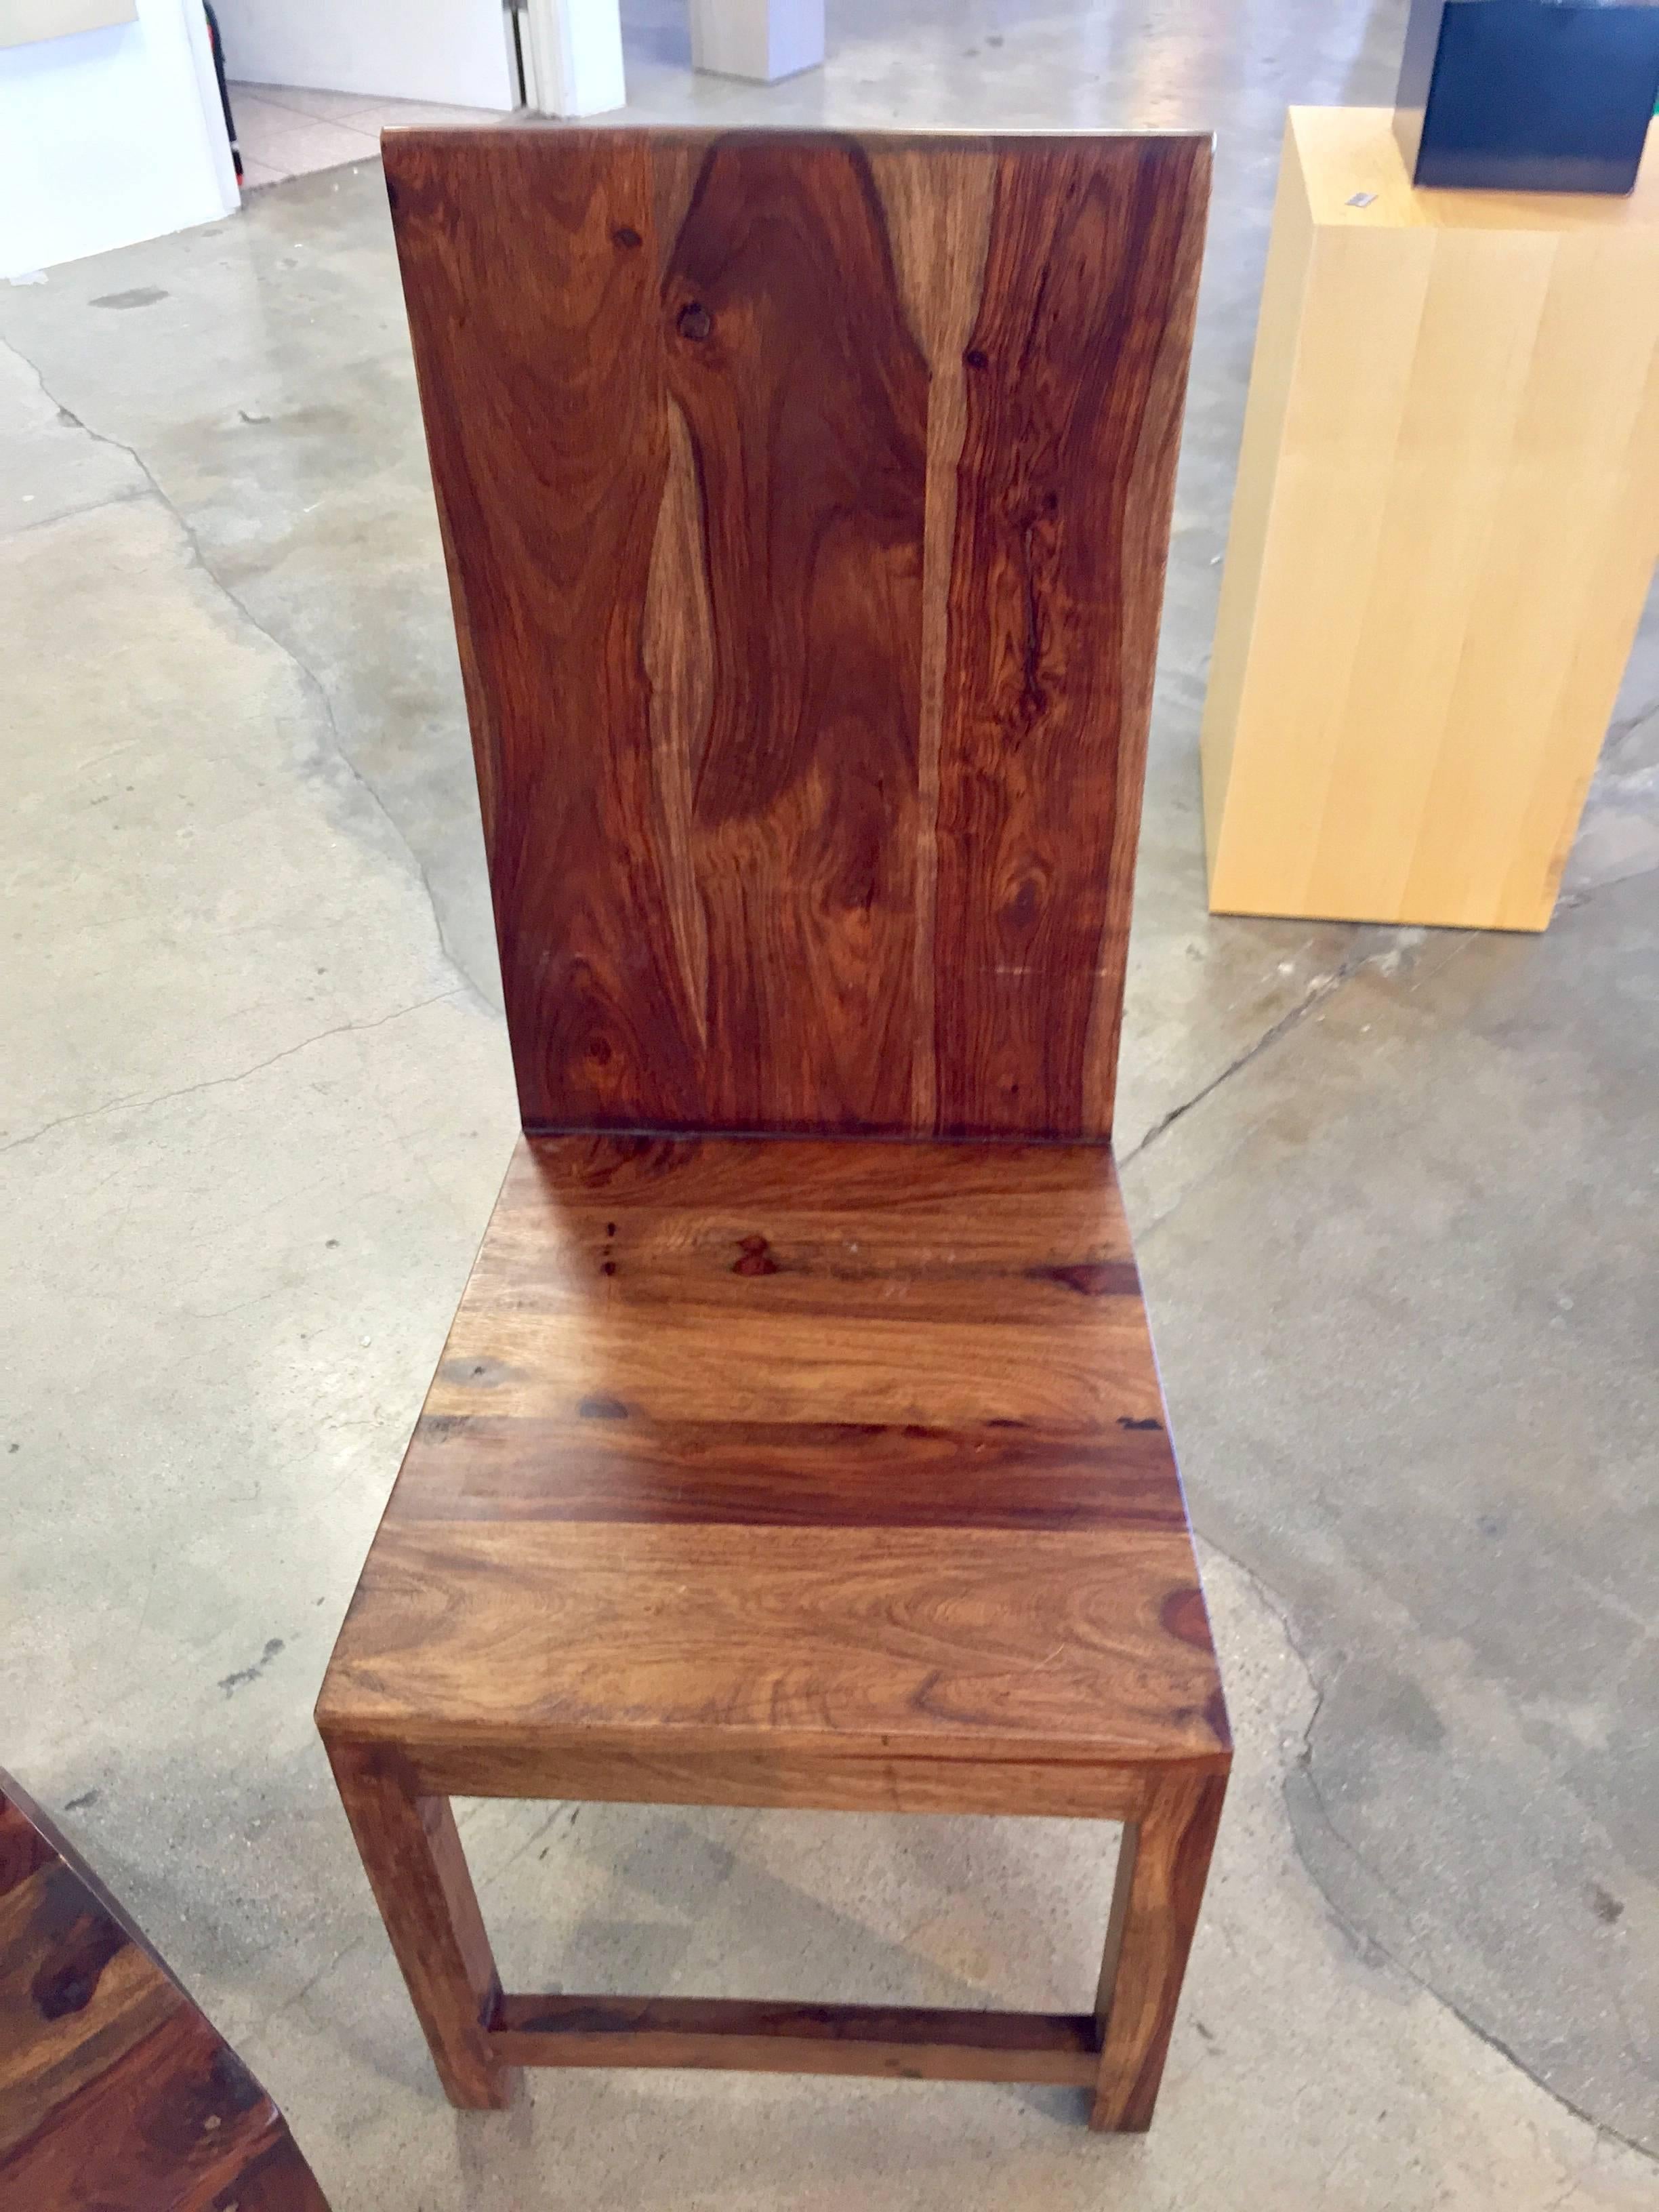 A set of four incredibly figured handmade chairs. The graining and figuring on each is unique and striking. These are most likely an exotic wood from the west pacific. As each chair is handmade, they are all slightly different in dimension and